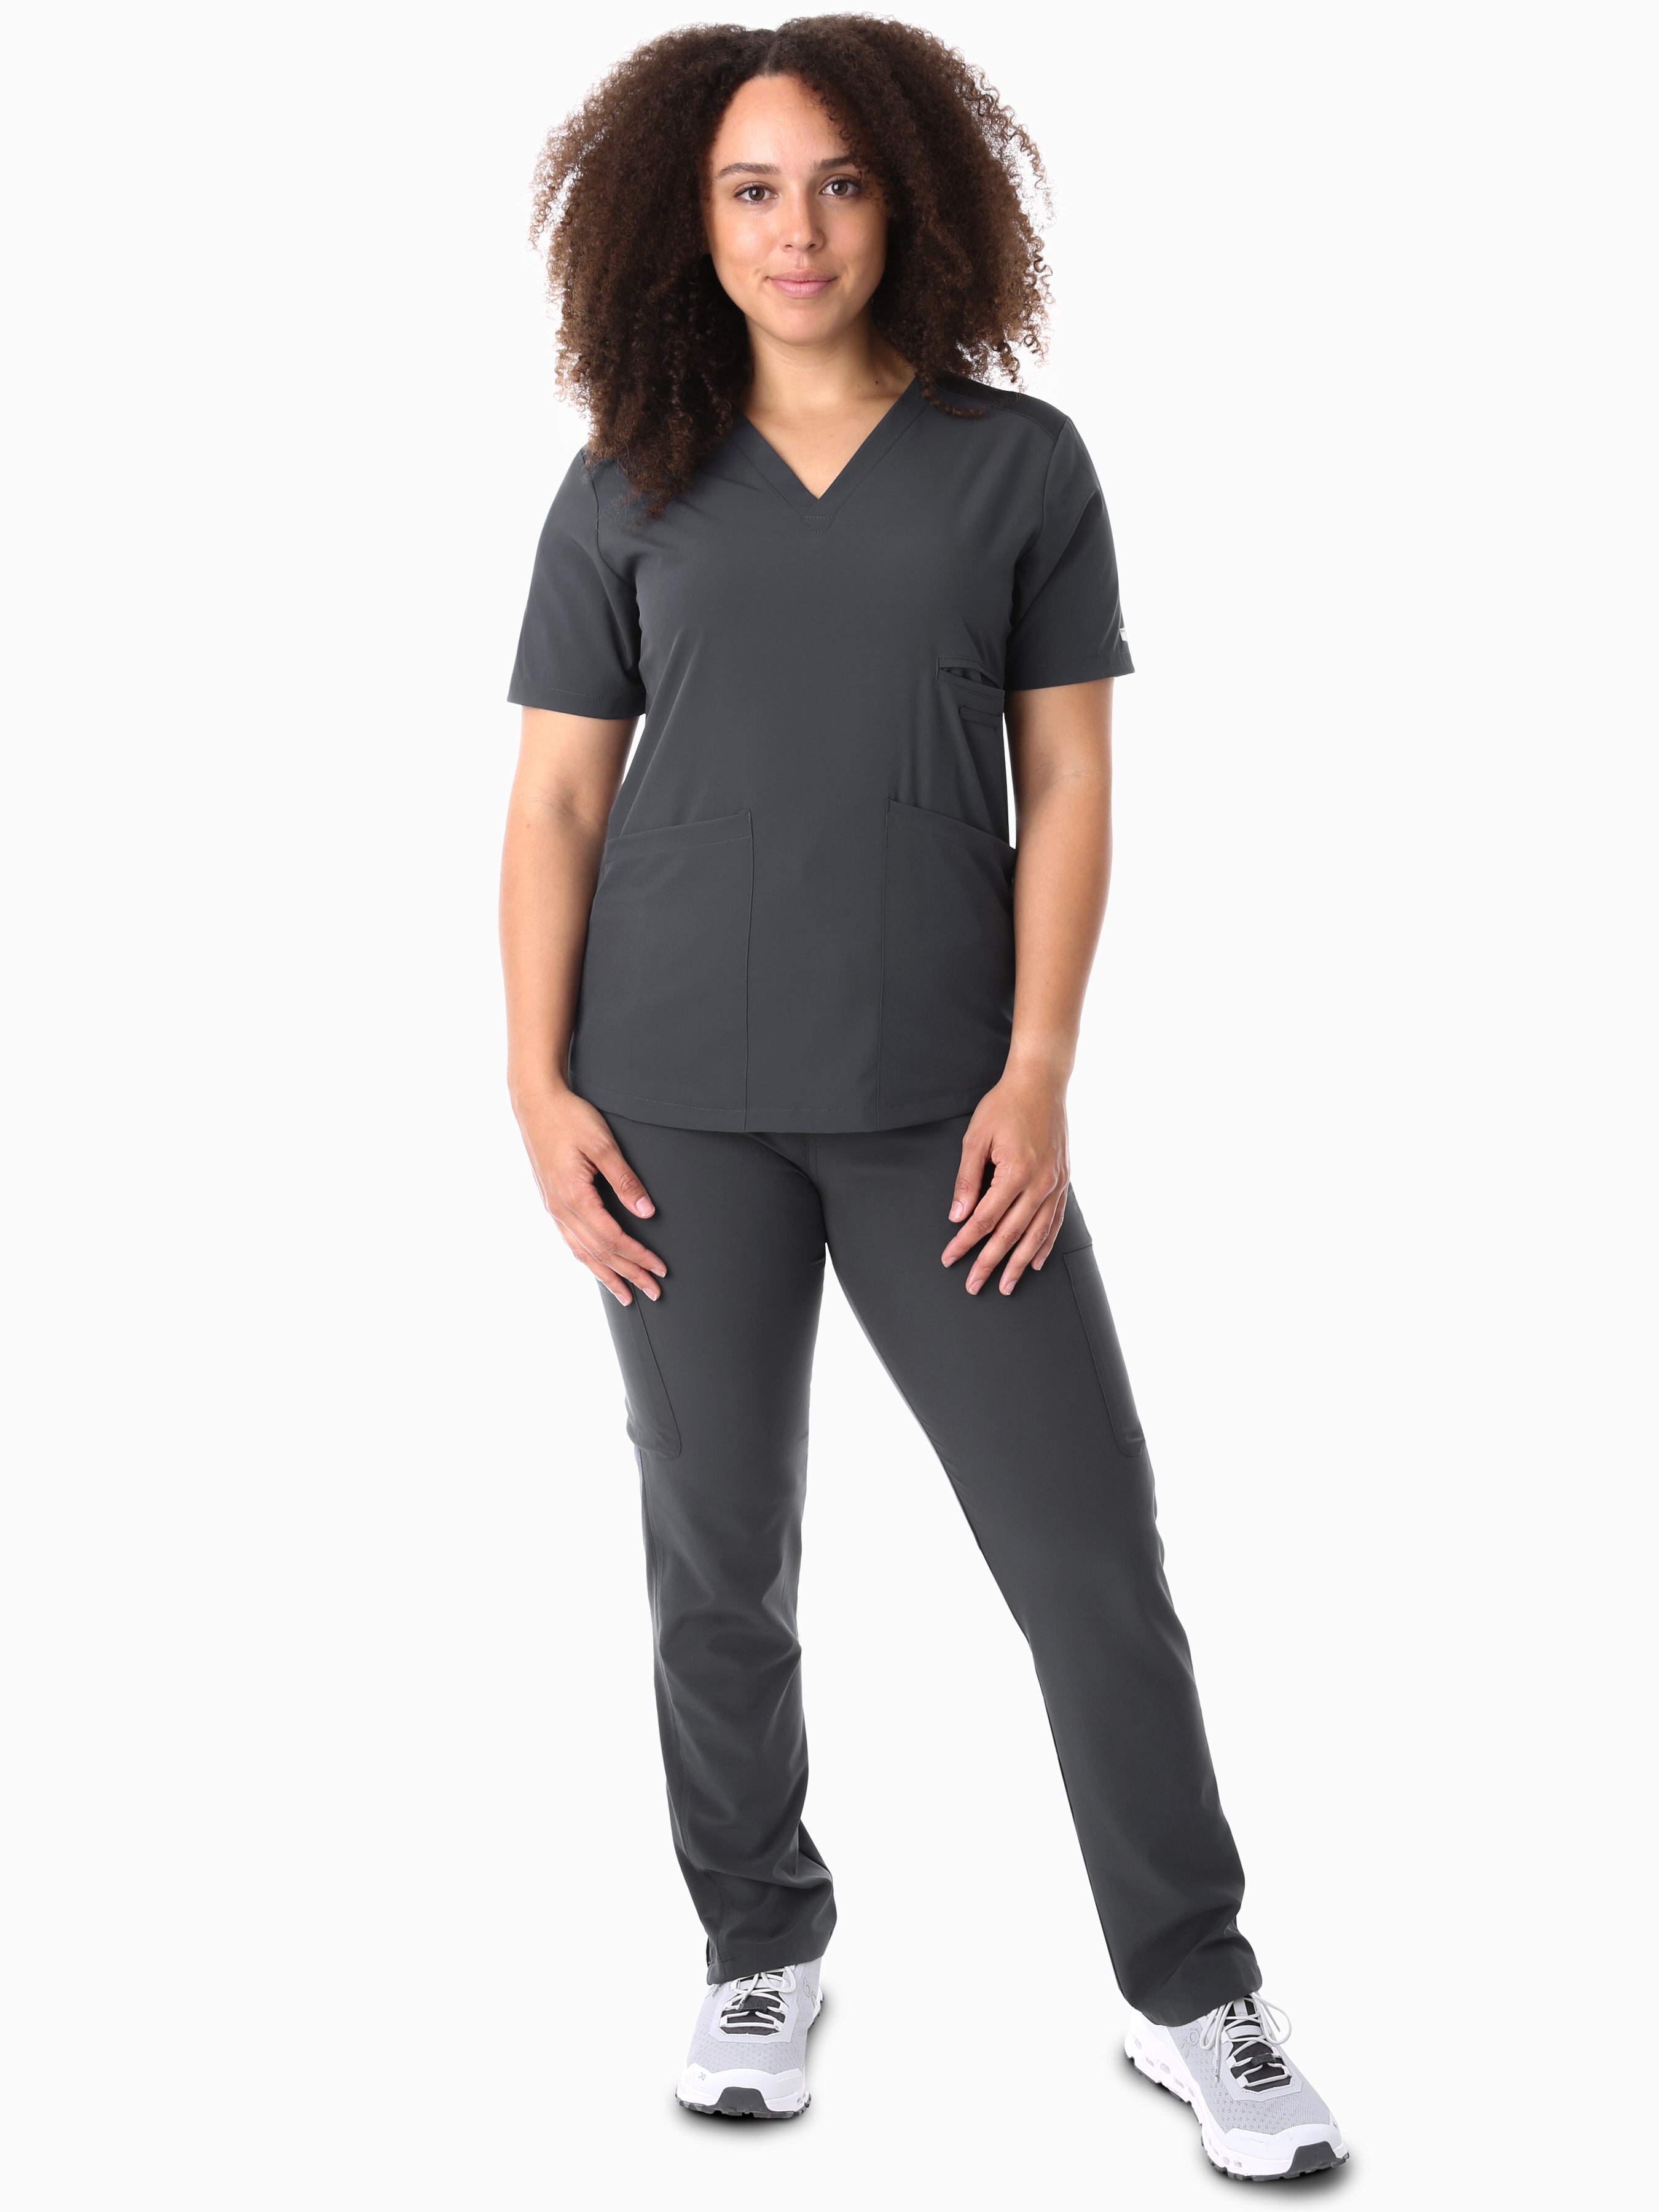 Women&#39;s Four-Pocket Scrub Top Charcoal Top Full Body Front View with 9-Pocket Pants